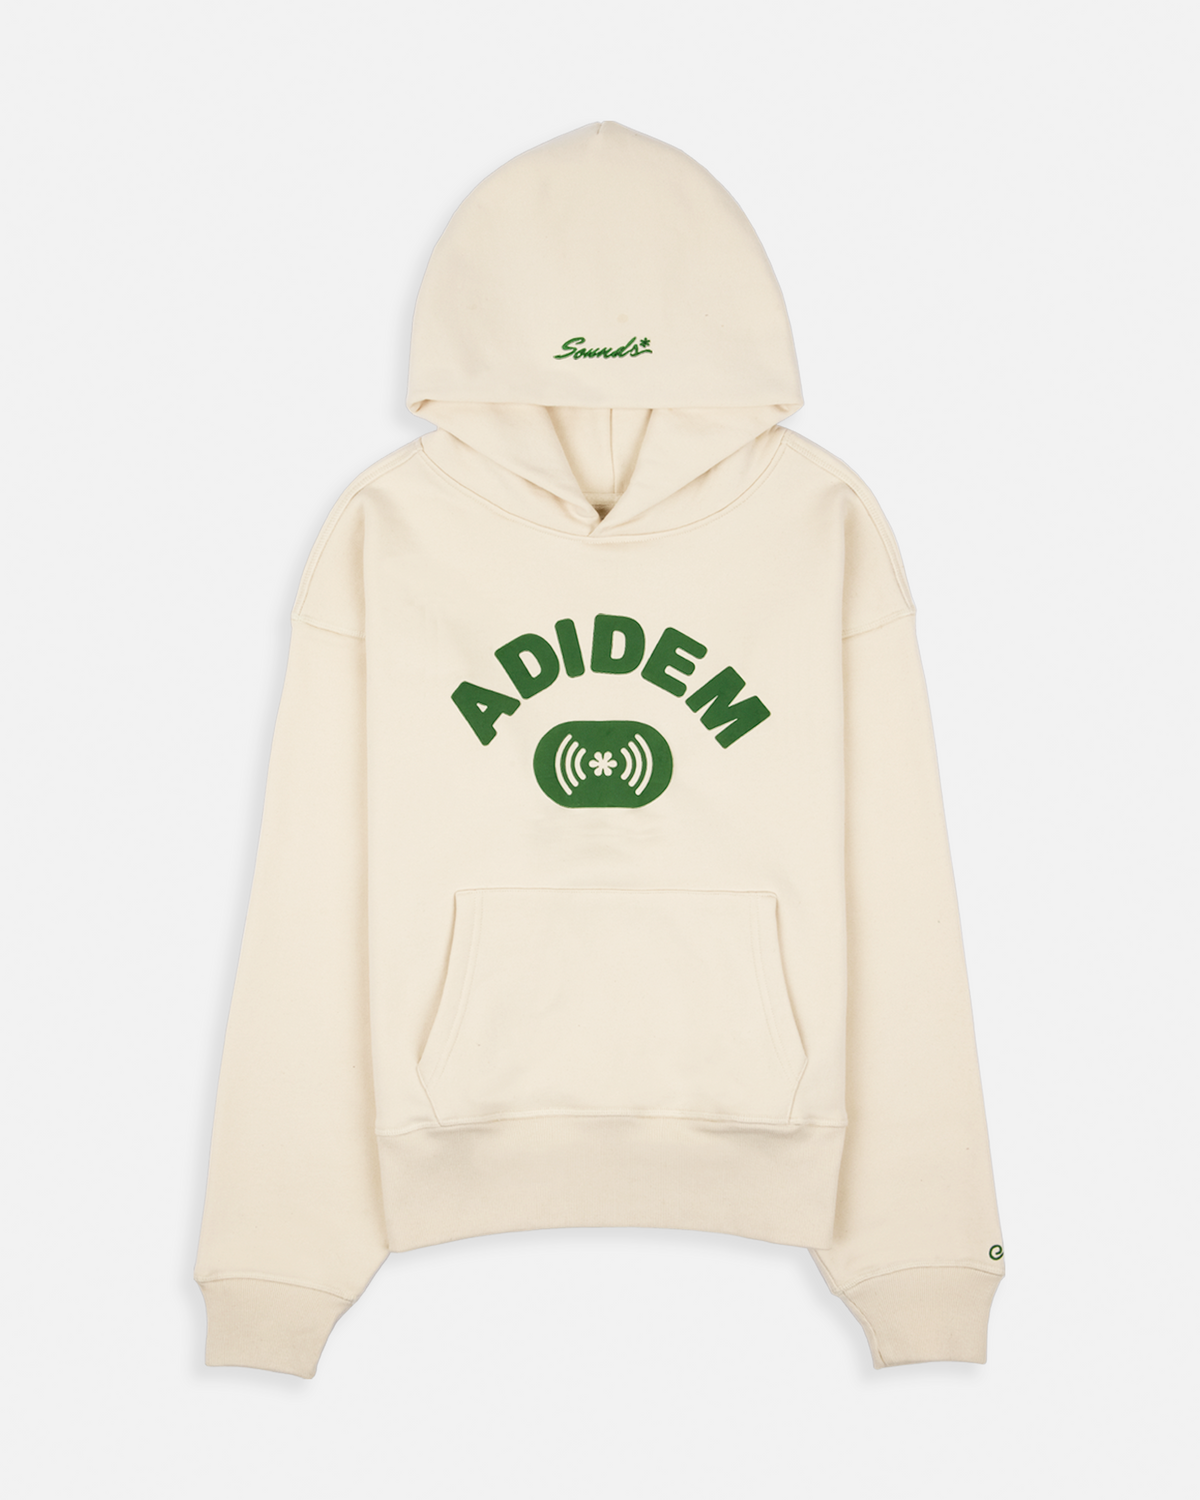 Sounds© Hoodie